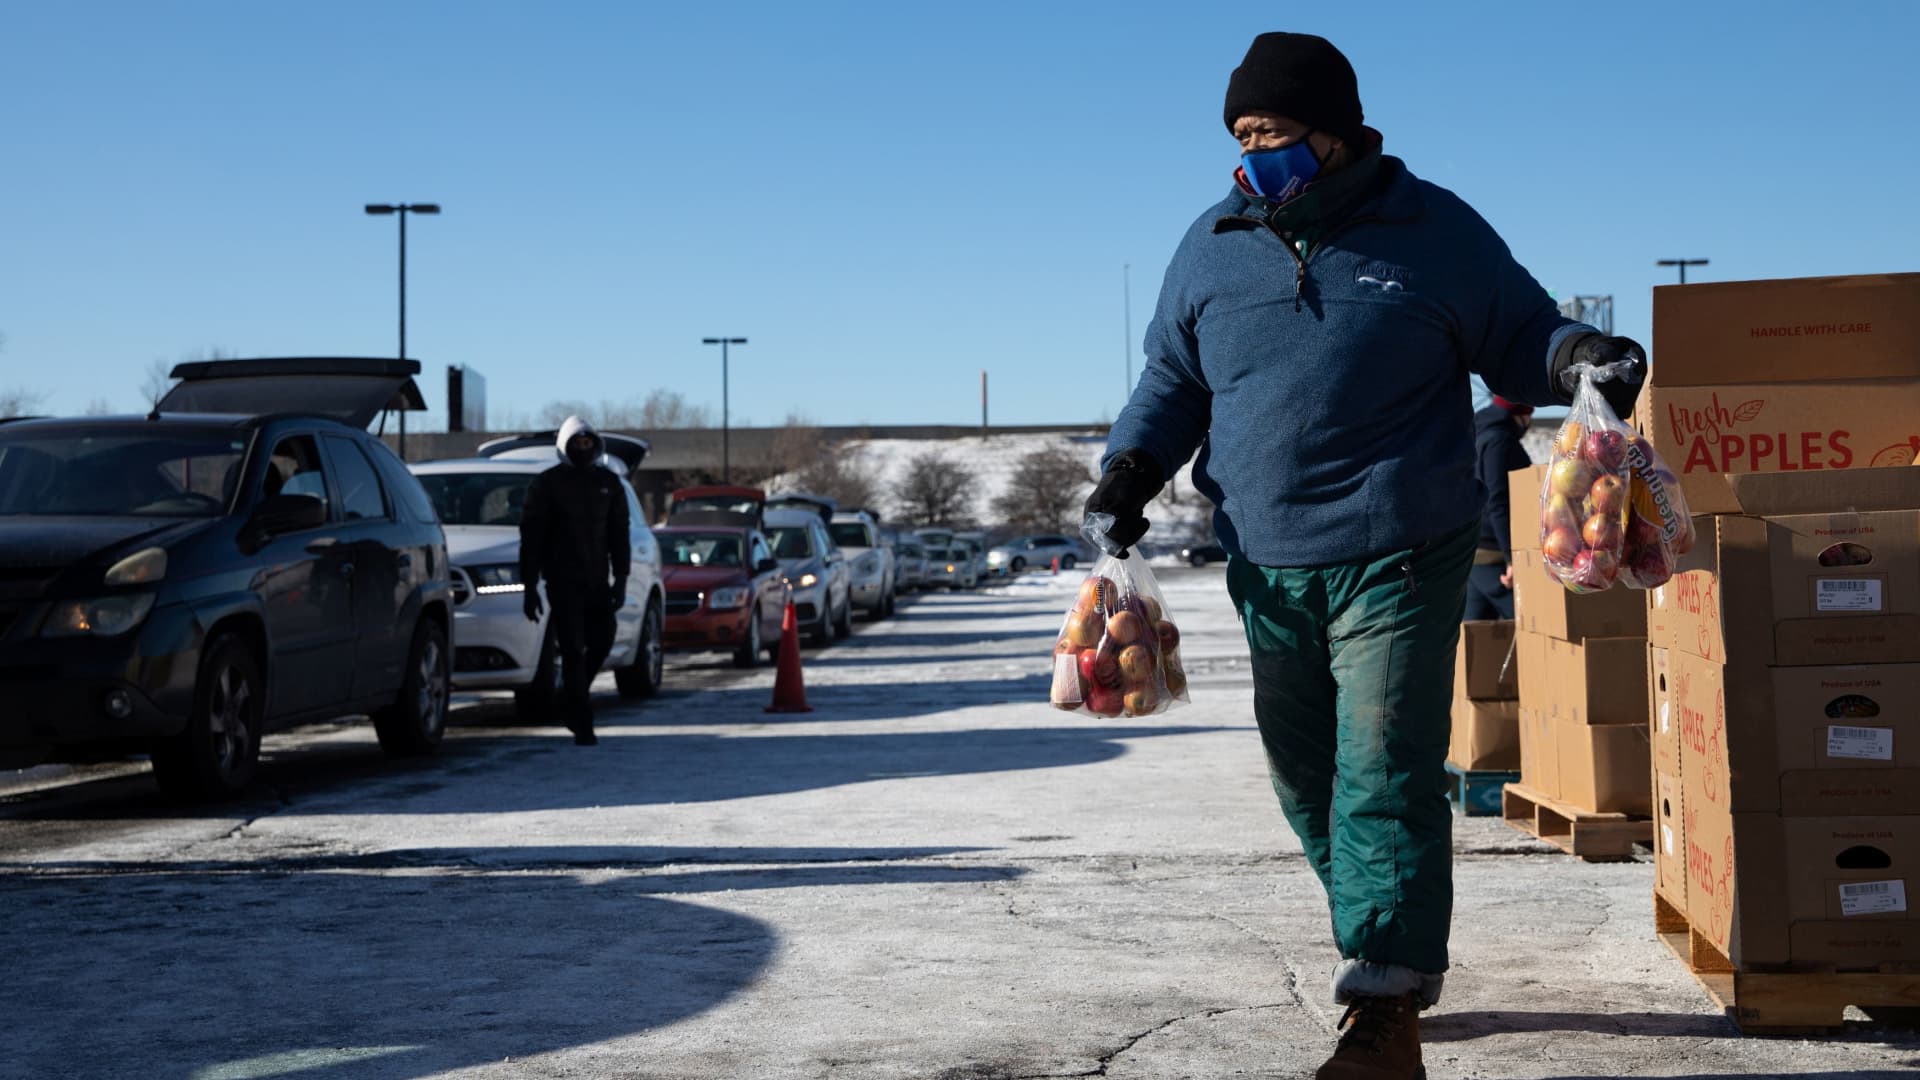 A volunteer carries food as he loads up cars of people who line up to receive food assistance amid the coronavirus disease (COVID-19) outbreak in Wayne County area at Second Ebenezer Church in Detroit, Michigan, January 29, 2021.